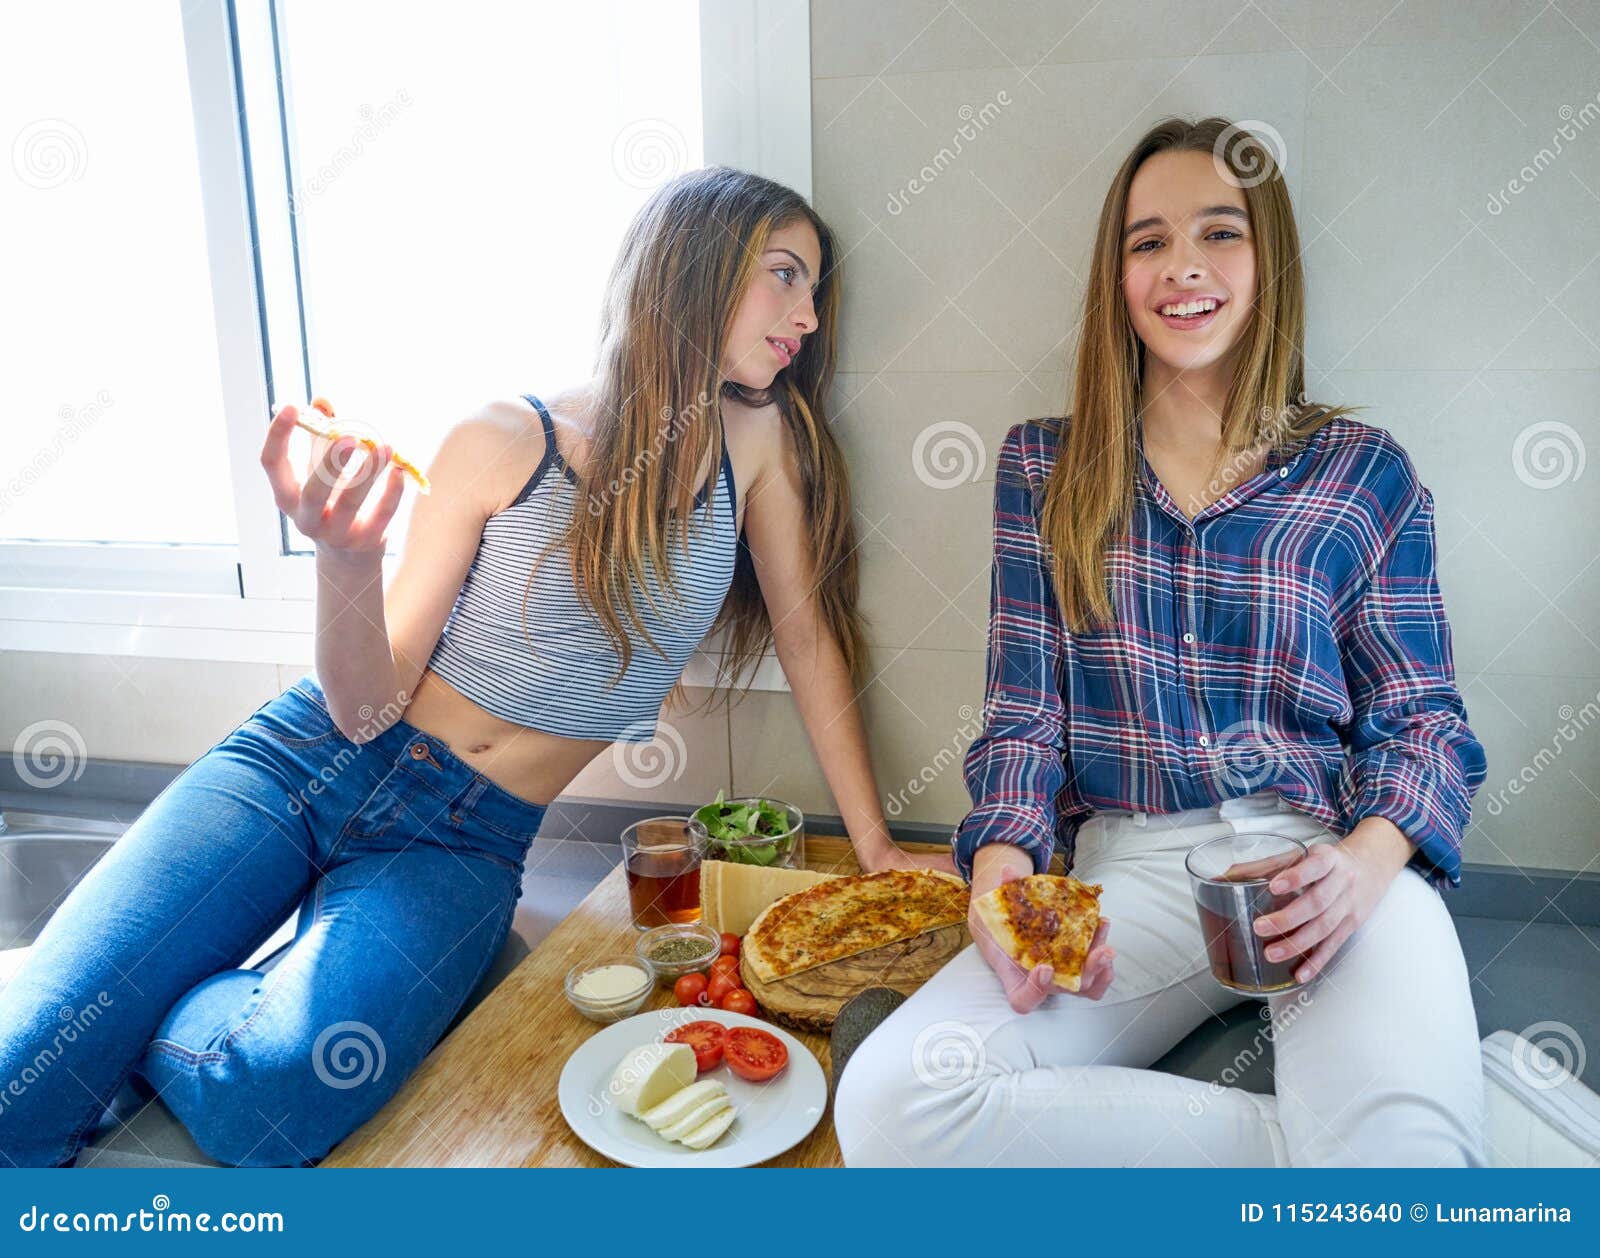 Girl Eats Out Friend